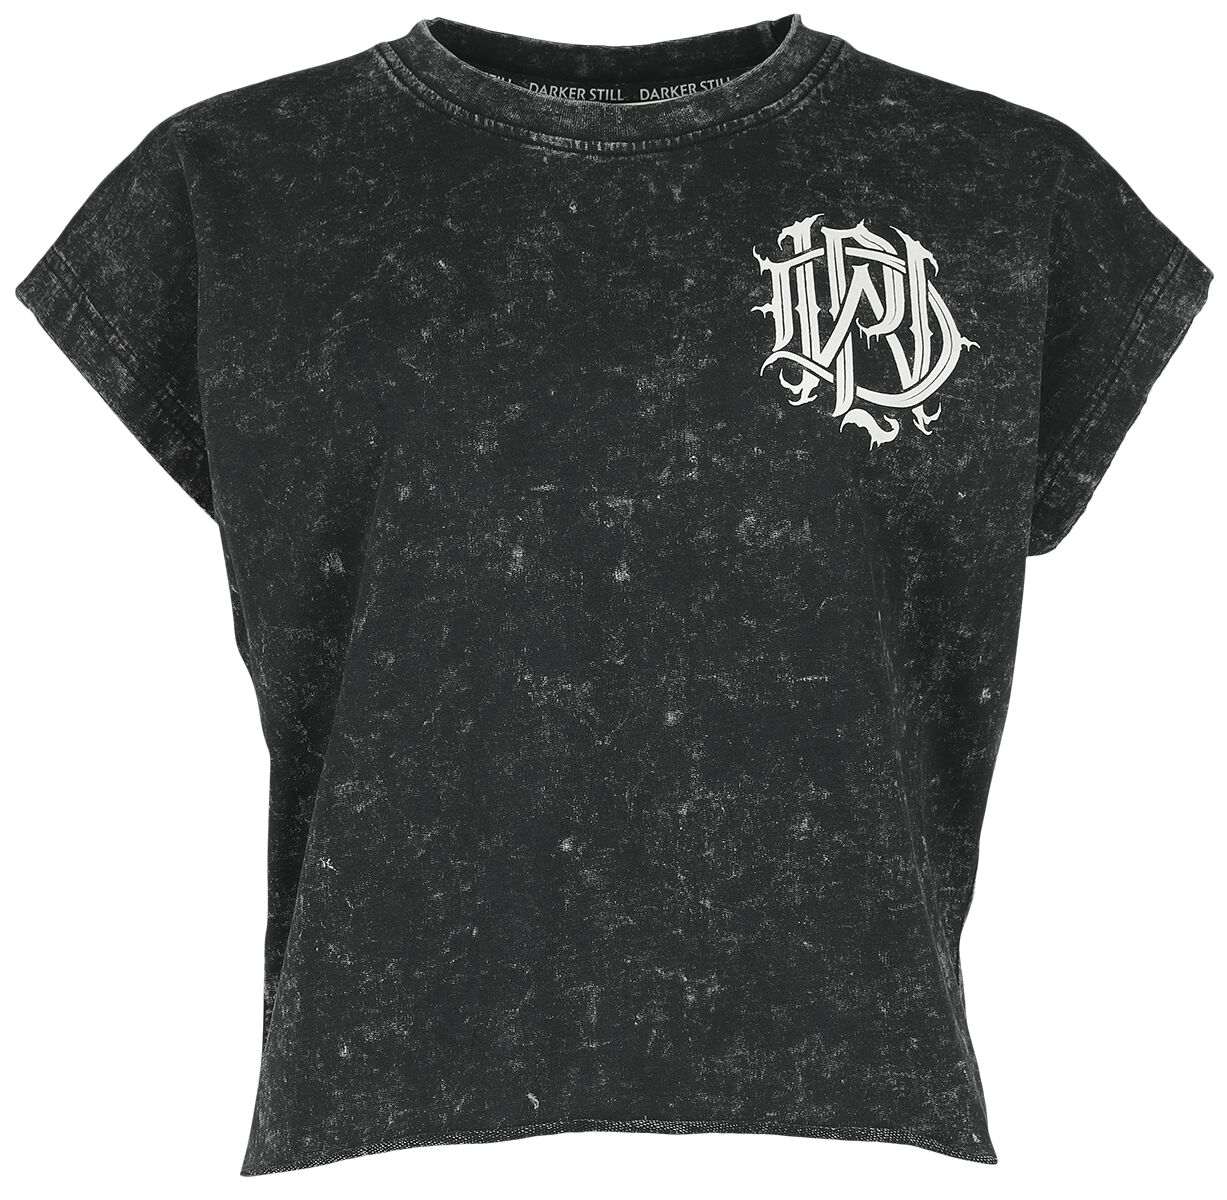 Image of T-Shirt di Parkway Drive - EMP Signature Collection - S a 3XL - Donna - grigio scuro